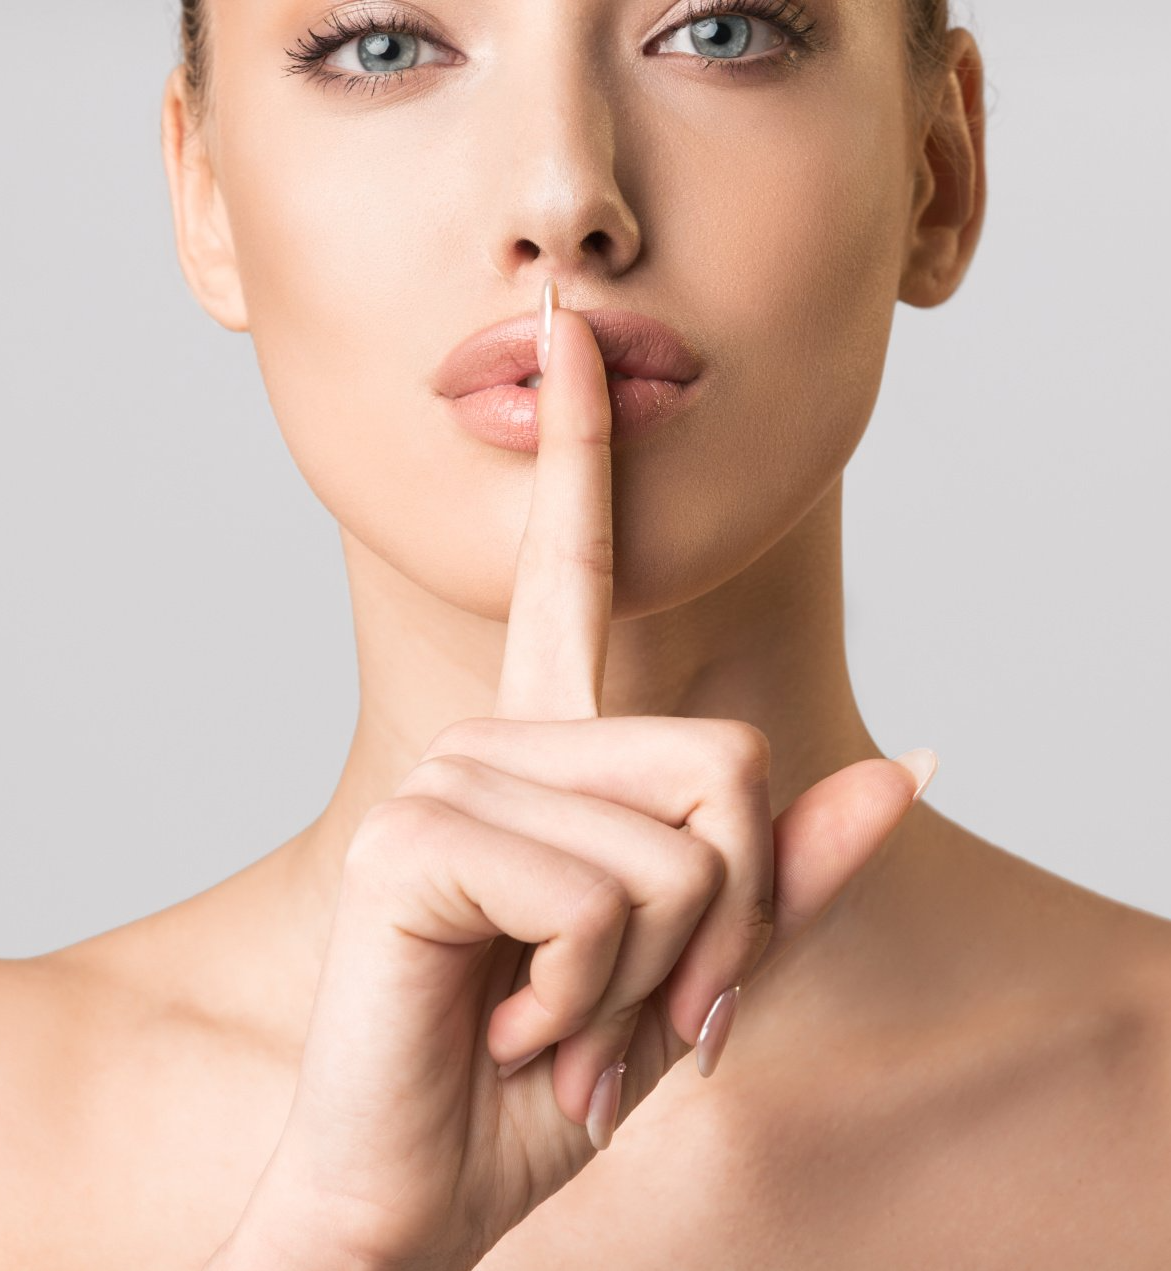 A woman is holding her finger to her mouth